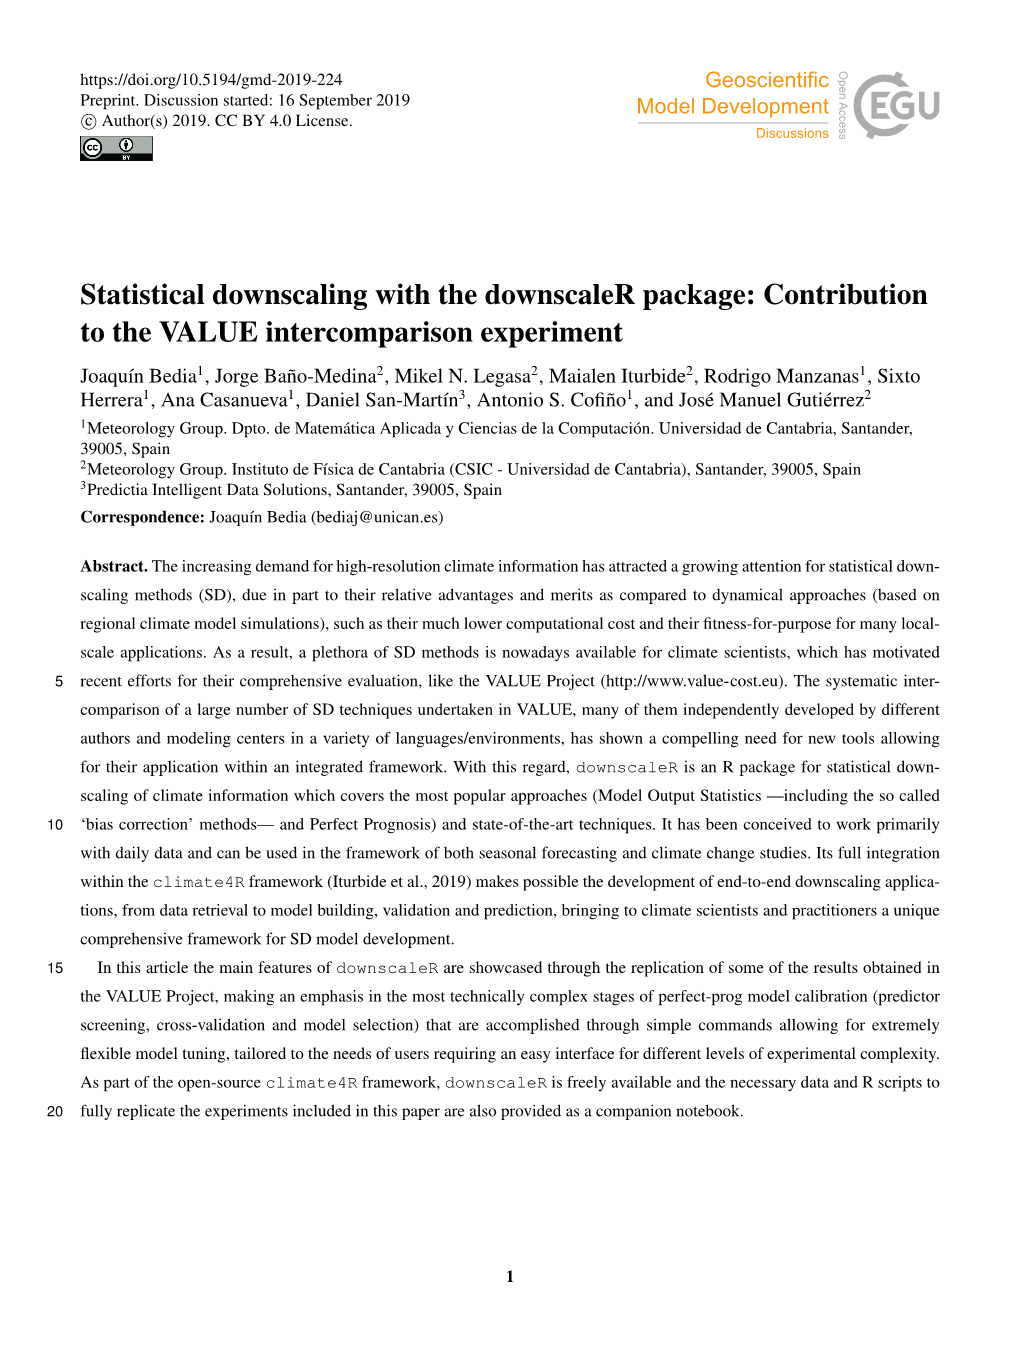 Statistical Downscaling with the Downscaler Package: Contribution to the VALUE Intercomparison Experiment Joaquín Bedia1, Jorge Baño-Medina2, Mikel N